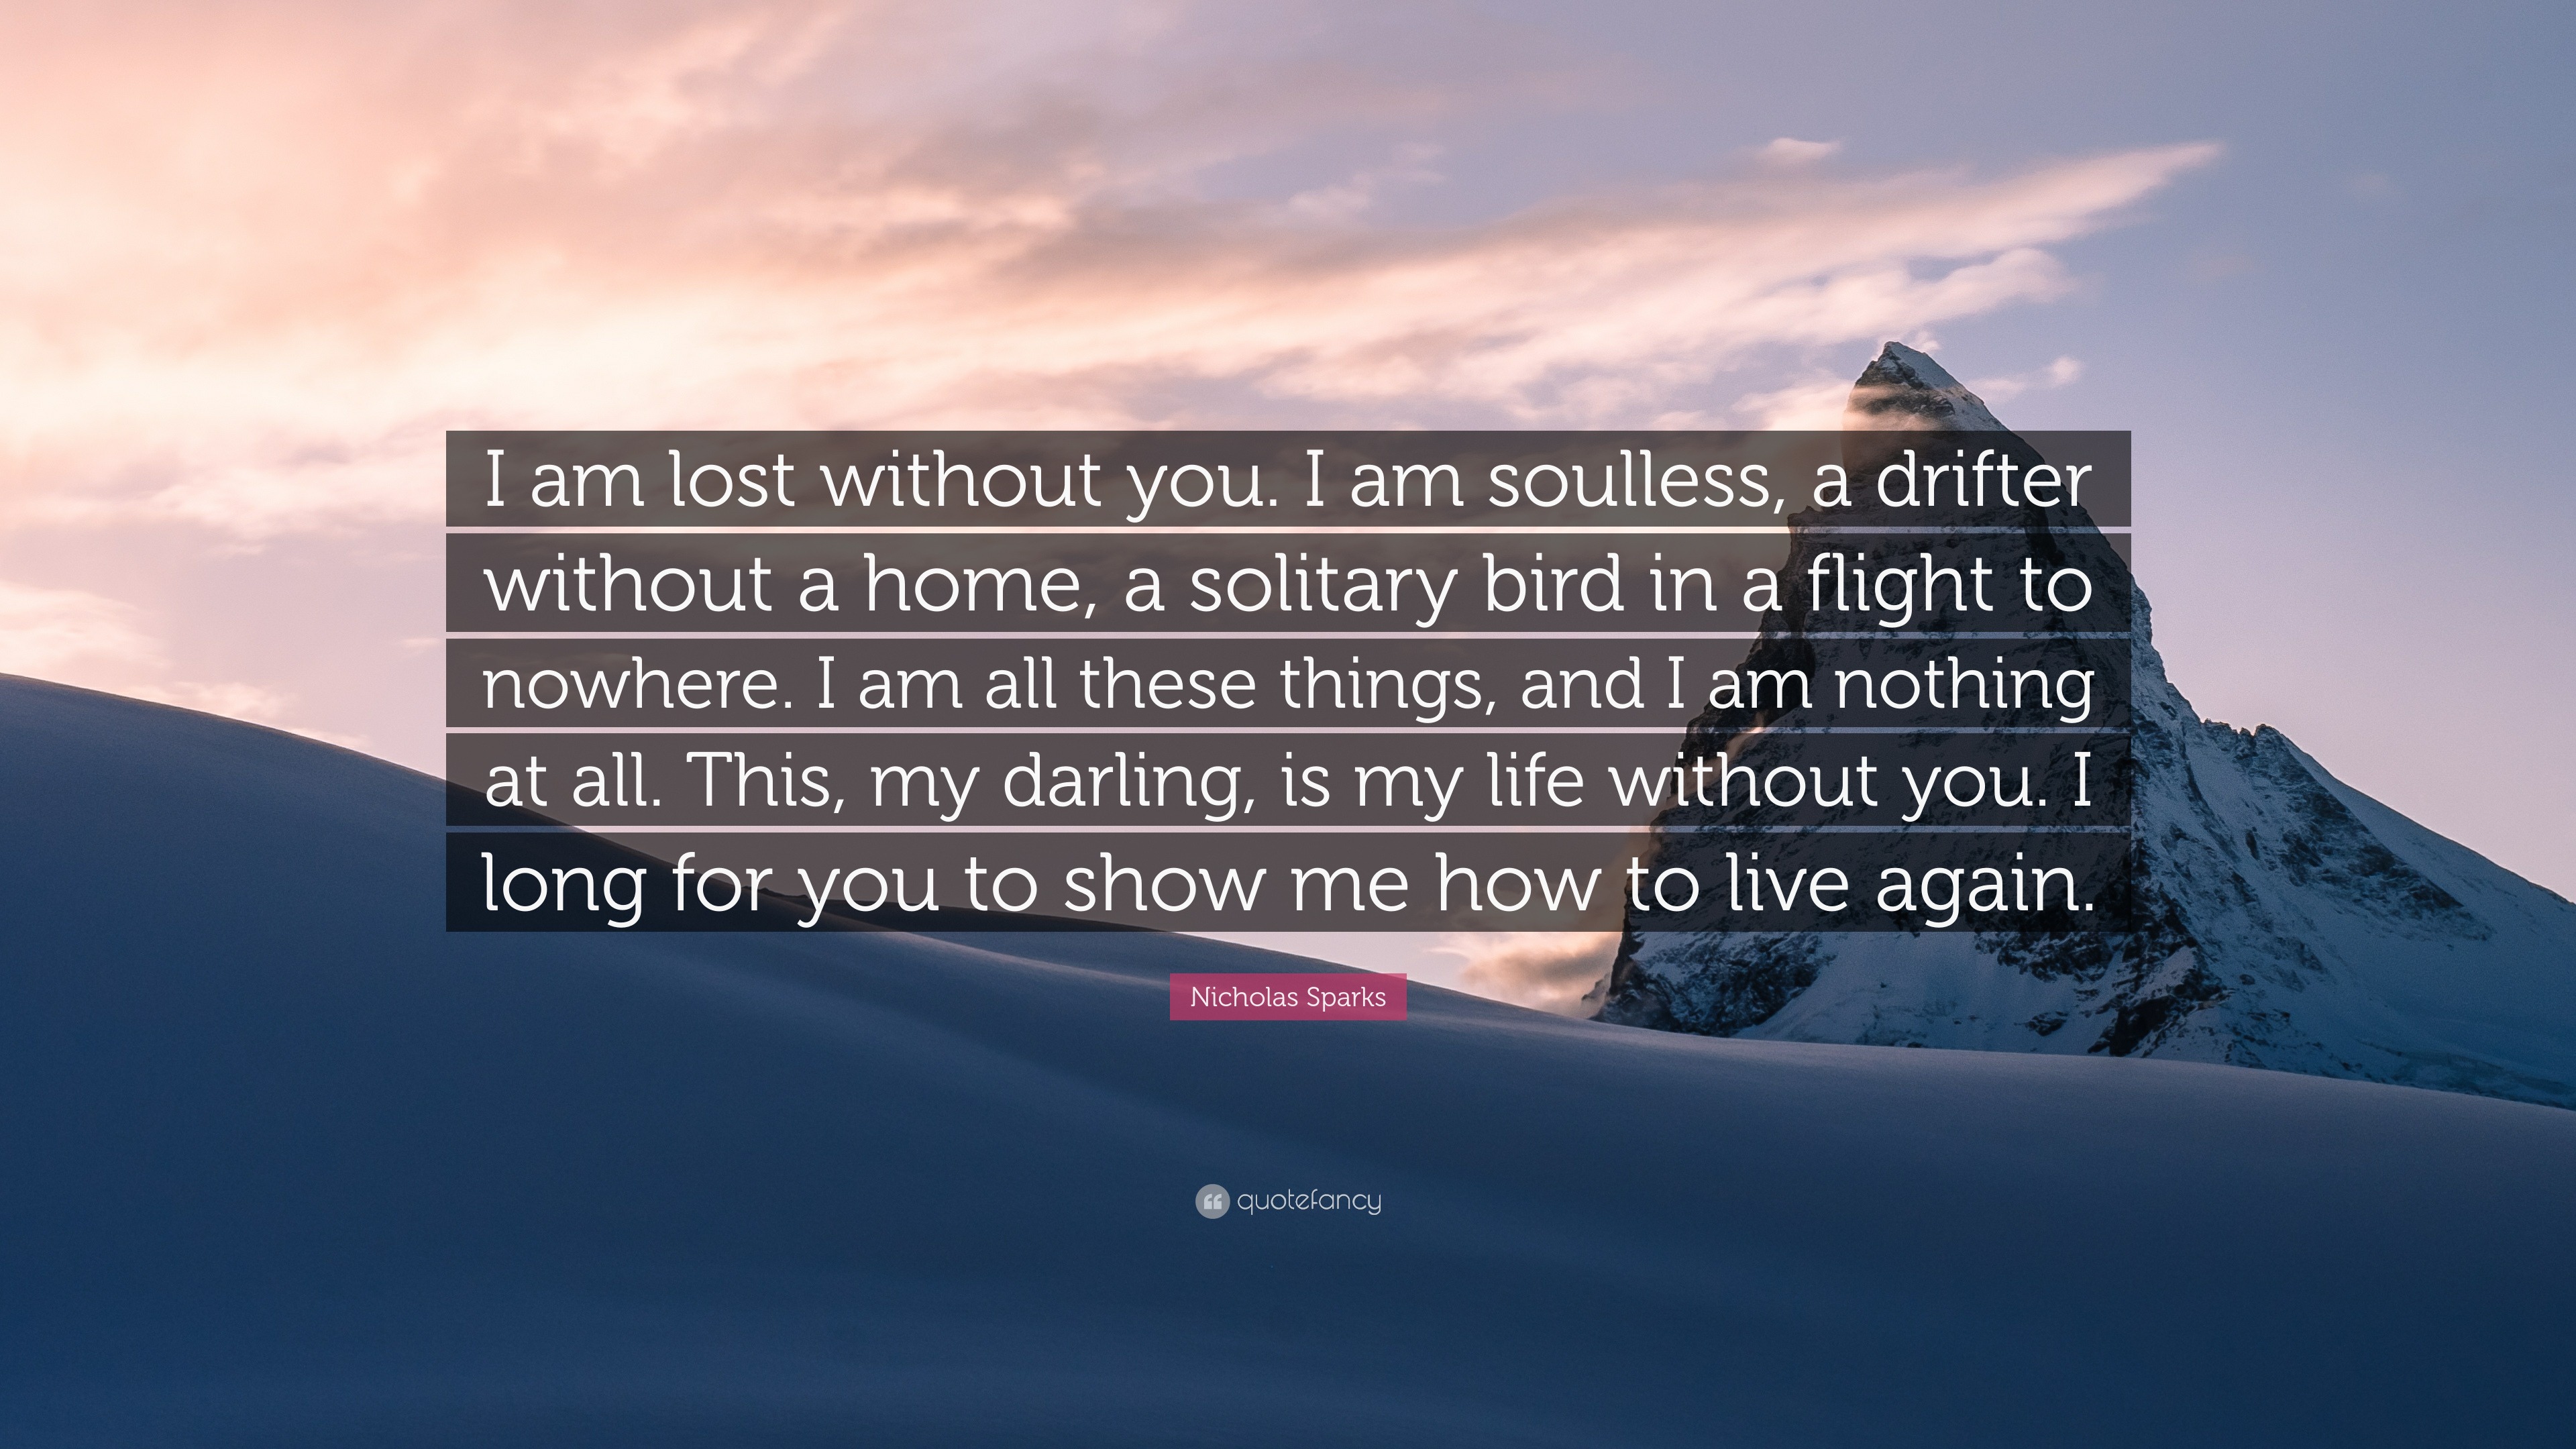 Nicholas Sparks Quote: “I am lost without you. I am soulless, a drifter